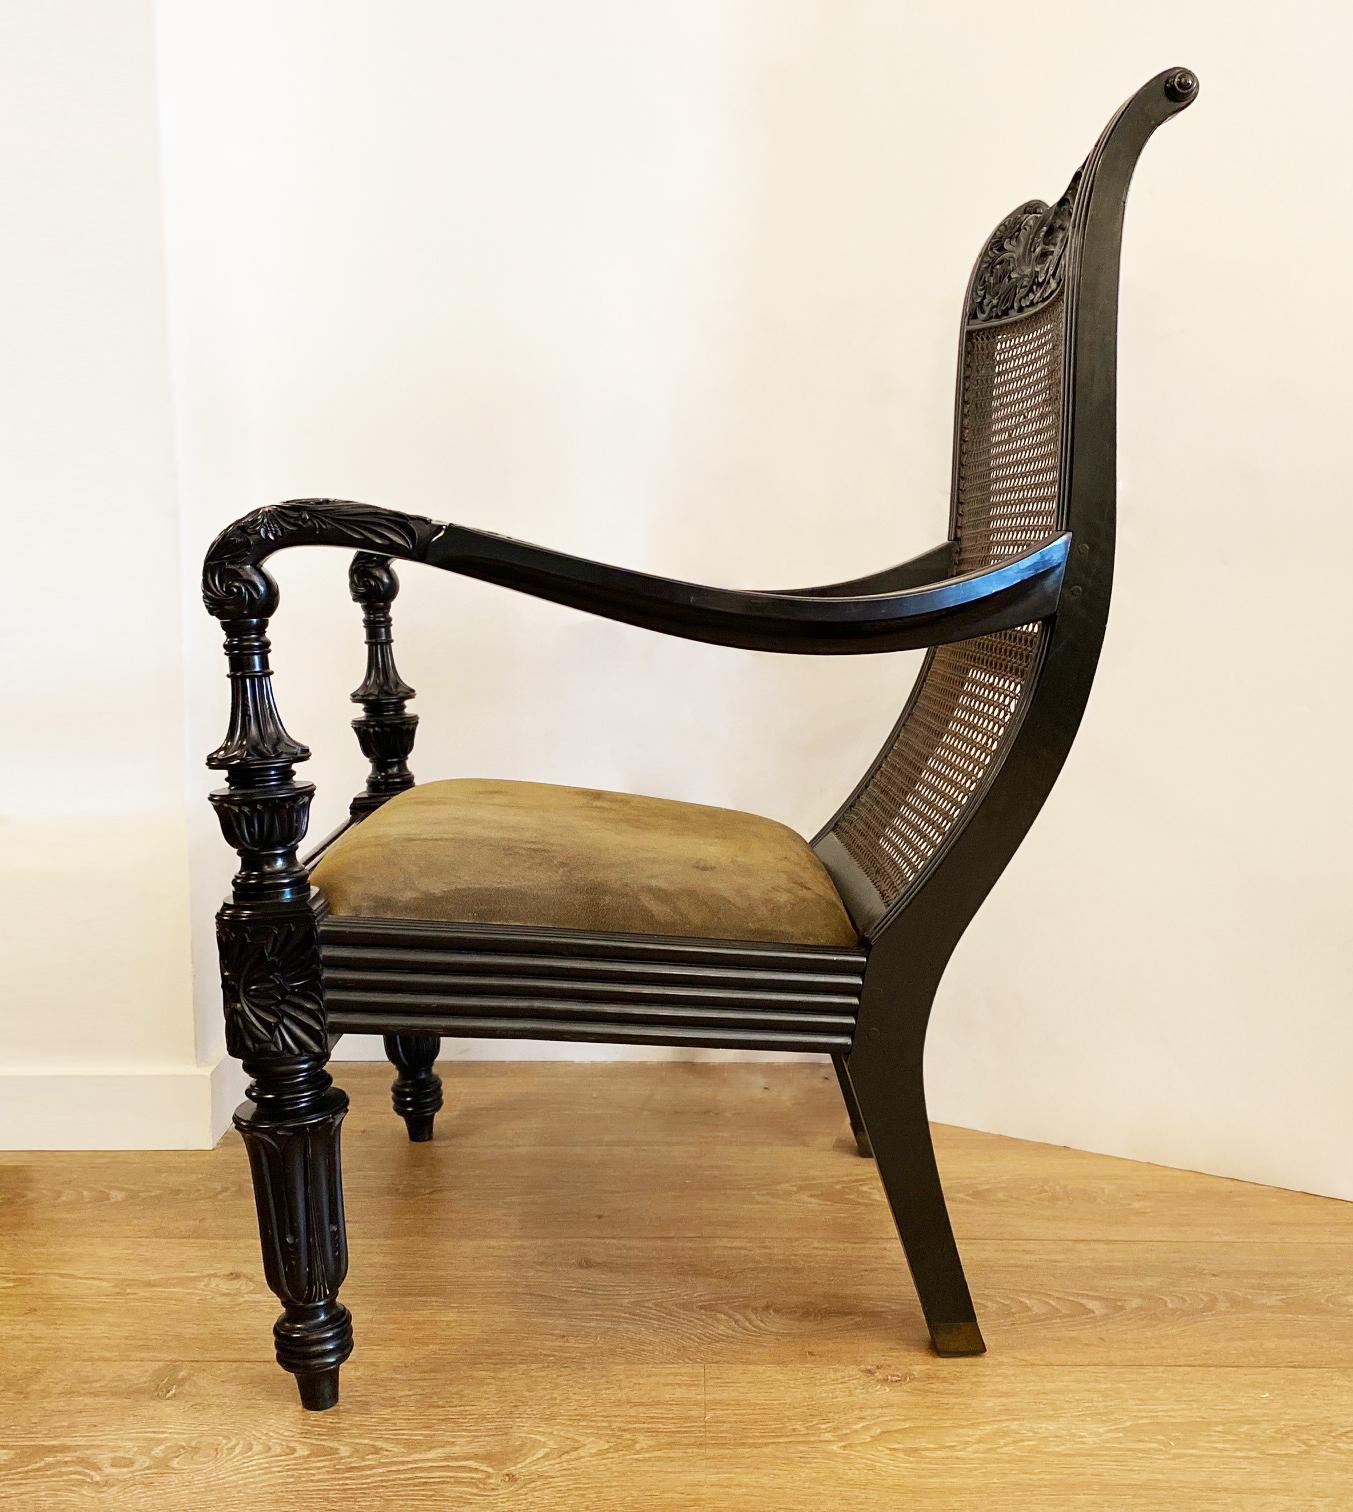 Rare pair of 19th century Anglo-Indian lounge chairs
Solid hand-carved ebony armchairs, curved back, long arms and raised on turned front legs. 
Caned back and original suede upholstered seats
Ceylon, Galle District, circa 1840
A similar chair